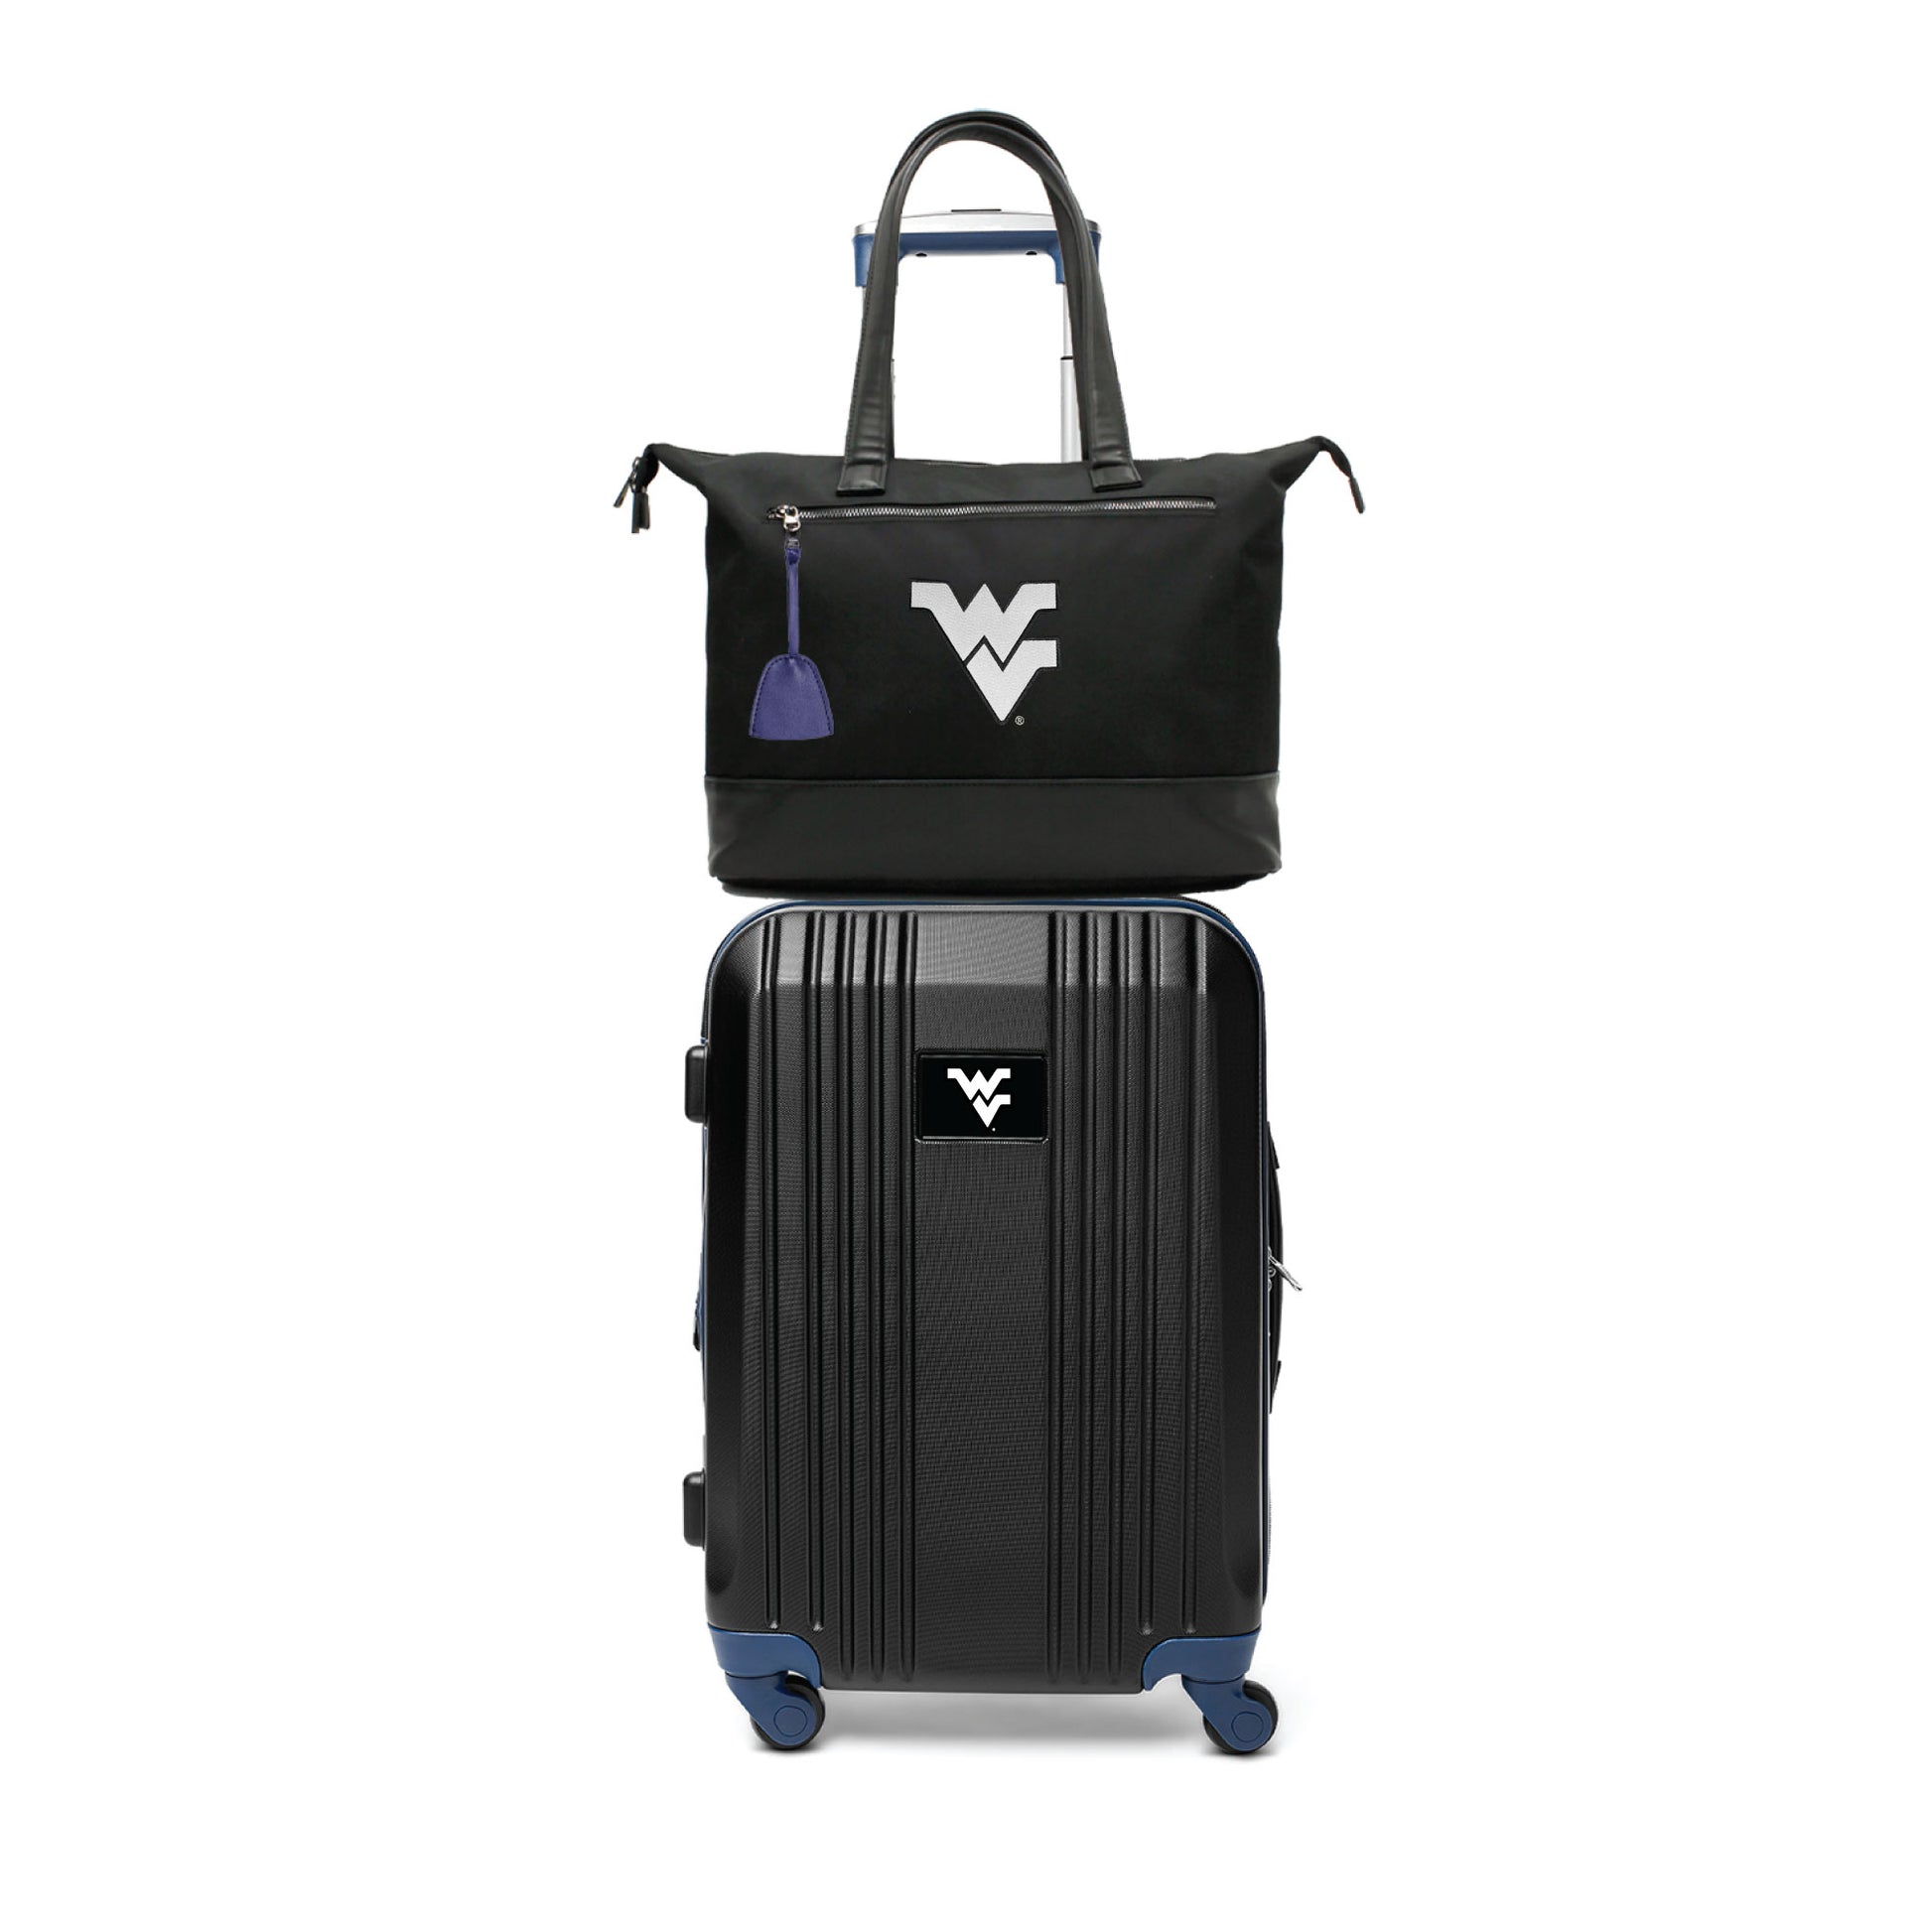 West Virginia Mountaineers Premium Laptop Tote Bag and Luggage Set